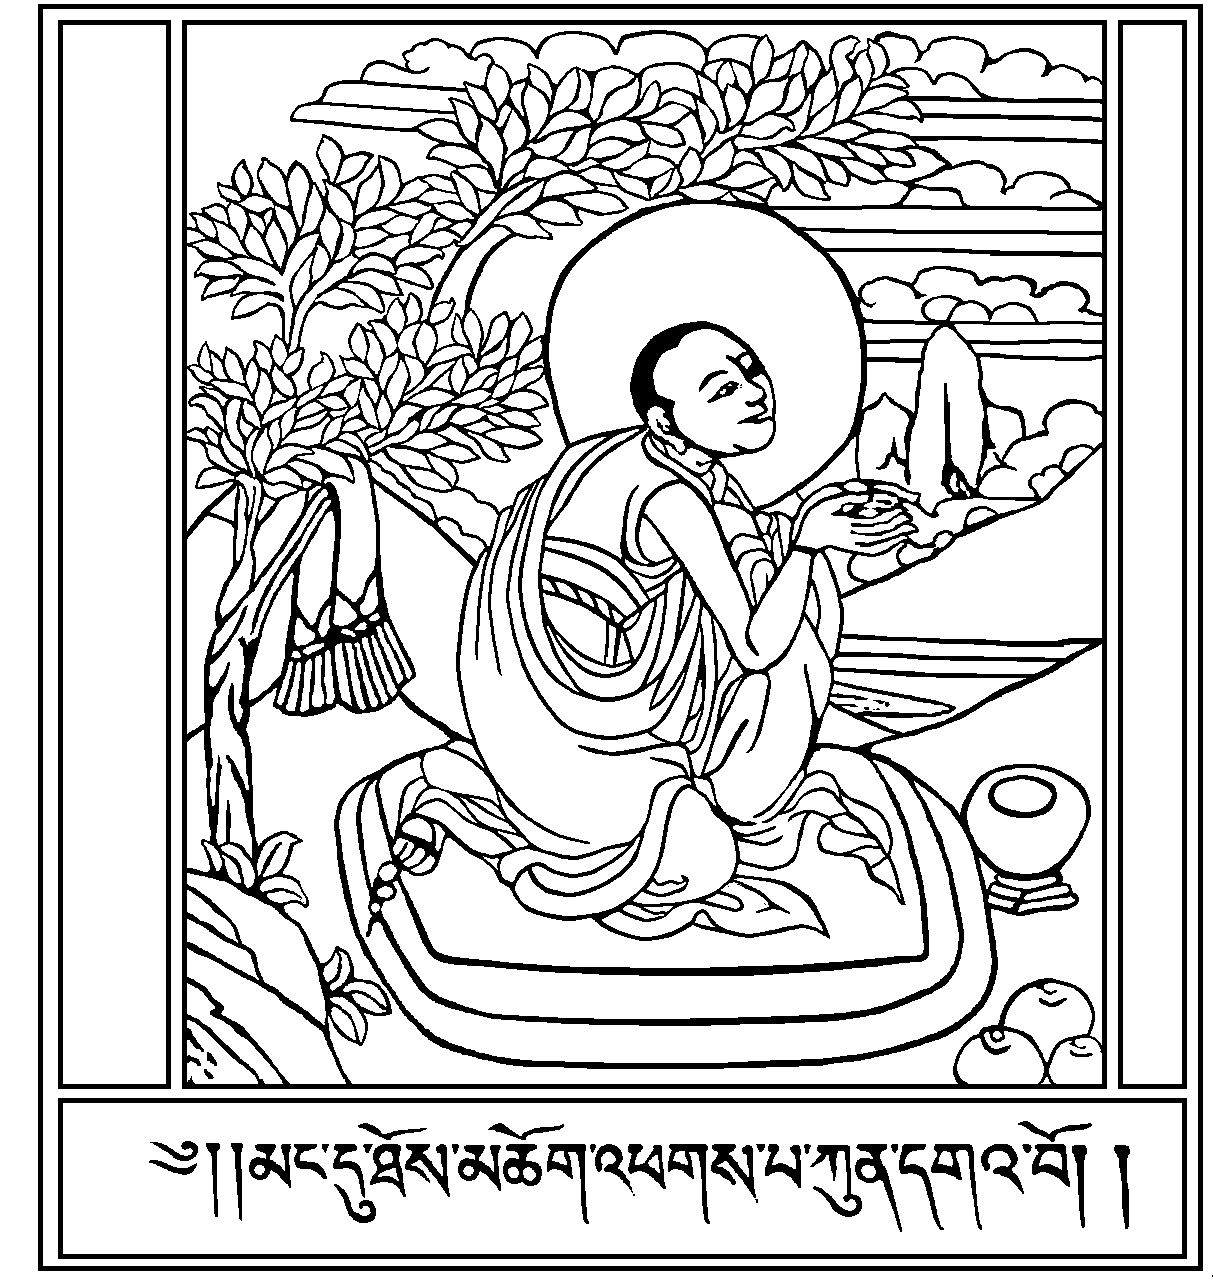 Monk Of Tibet coloring page